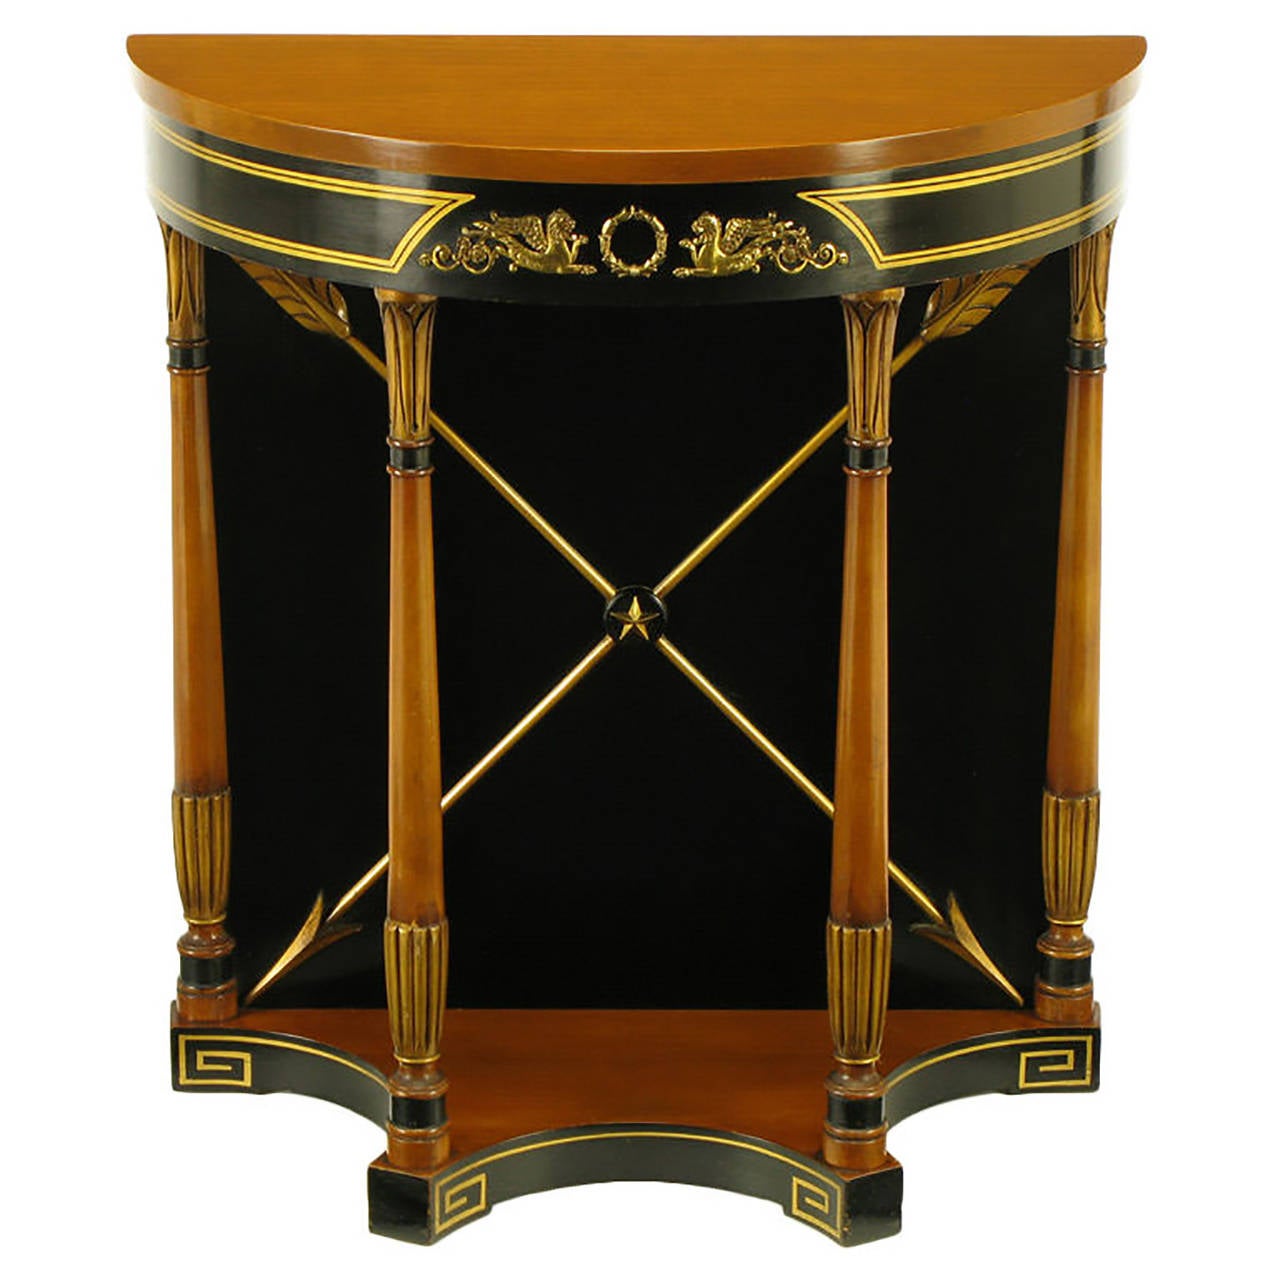 Empire Revival console table with parcel-gilt detailing and Greek key base. Black lacquered and maple wood with brass arrows, center wreath and winged griffins.